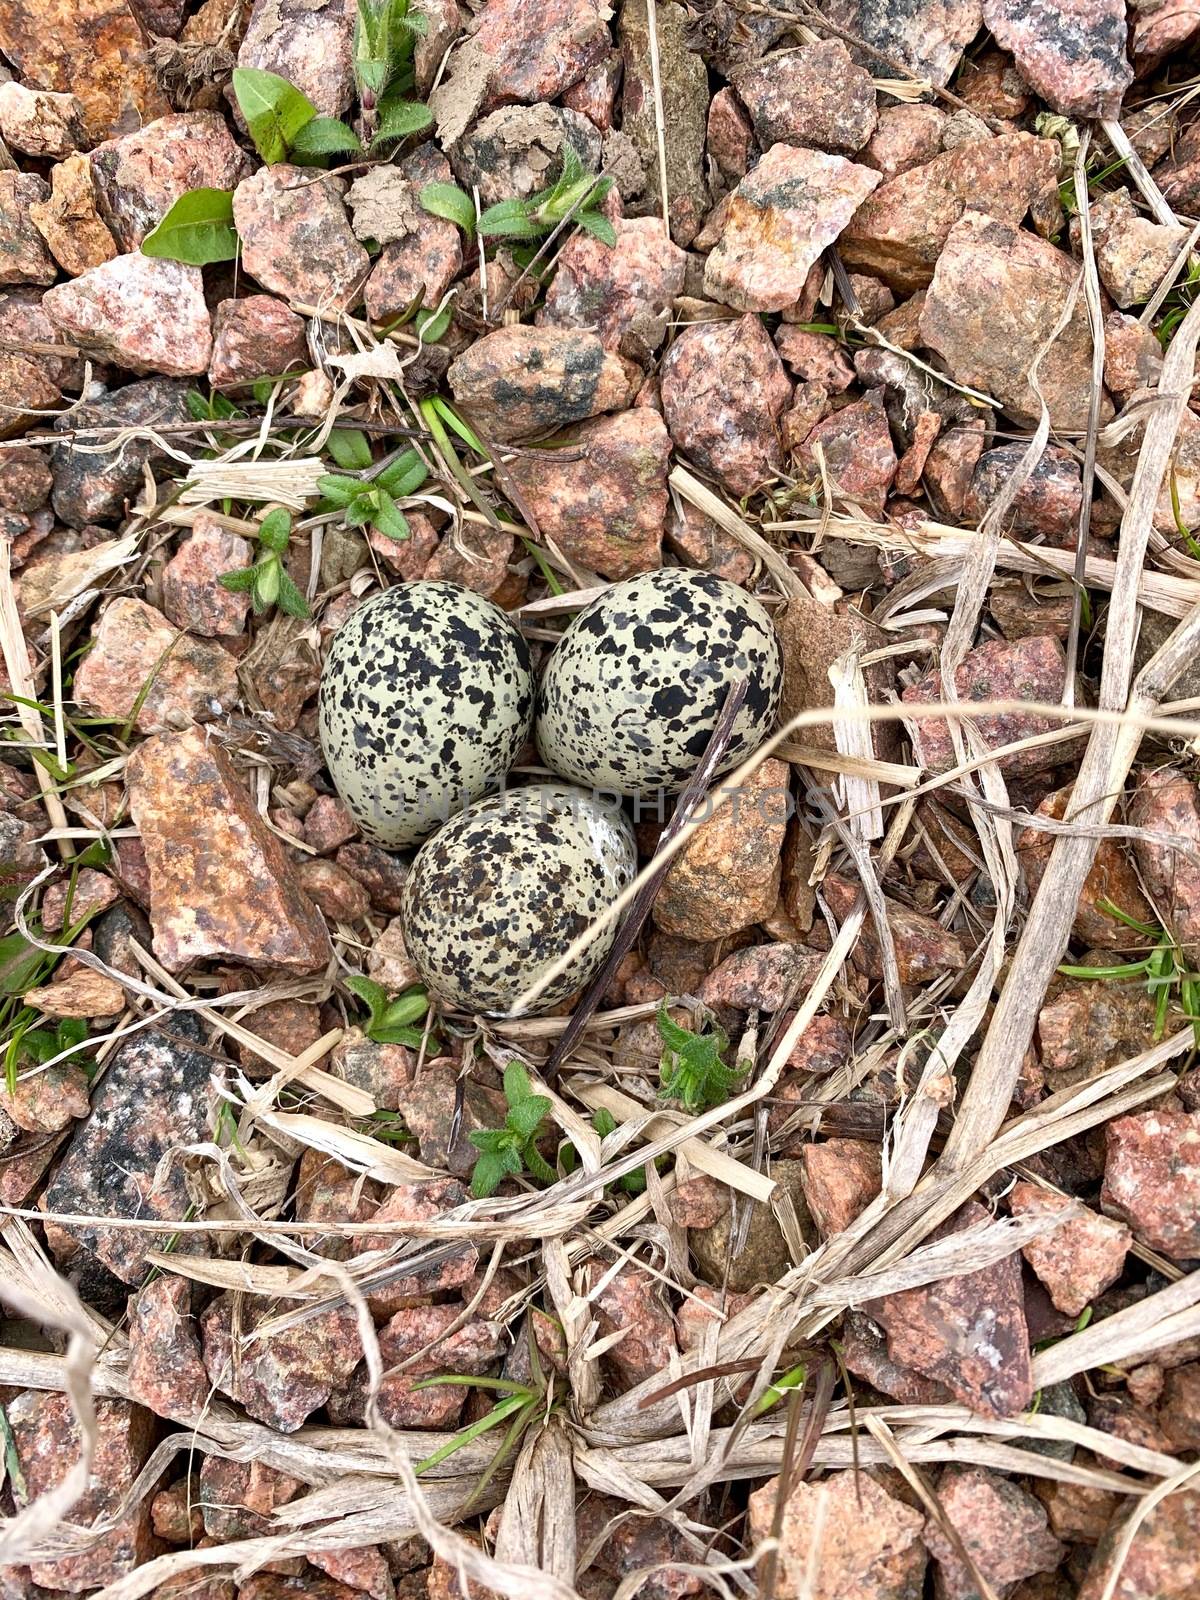 Killdeer or Charadrius vociferus Nest in the wild by dcwcreations